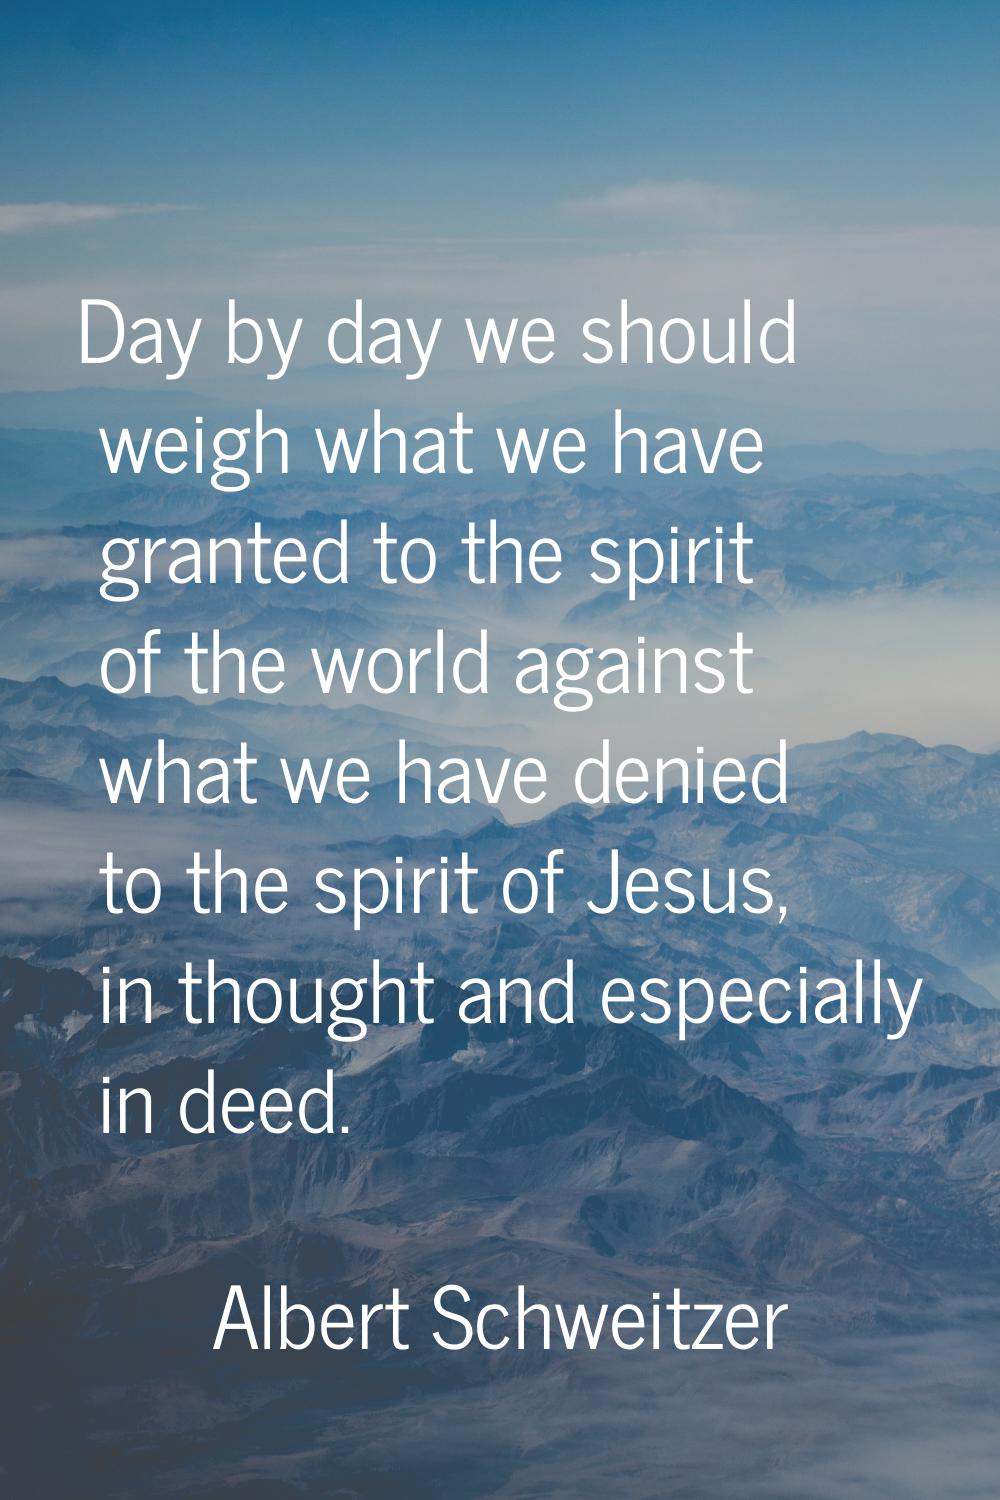 Day by day we should weigh what we have granted to the spirit of the world against what we have den